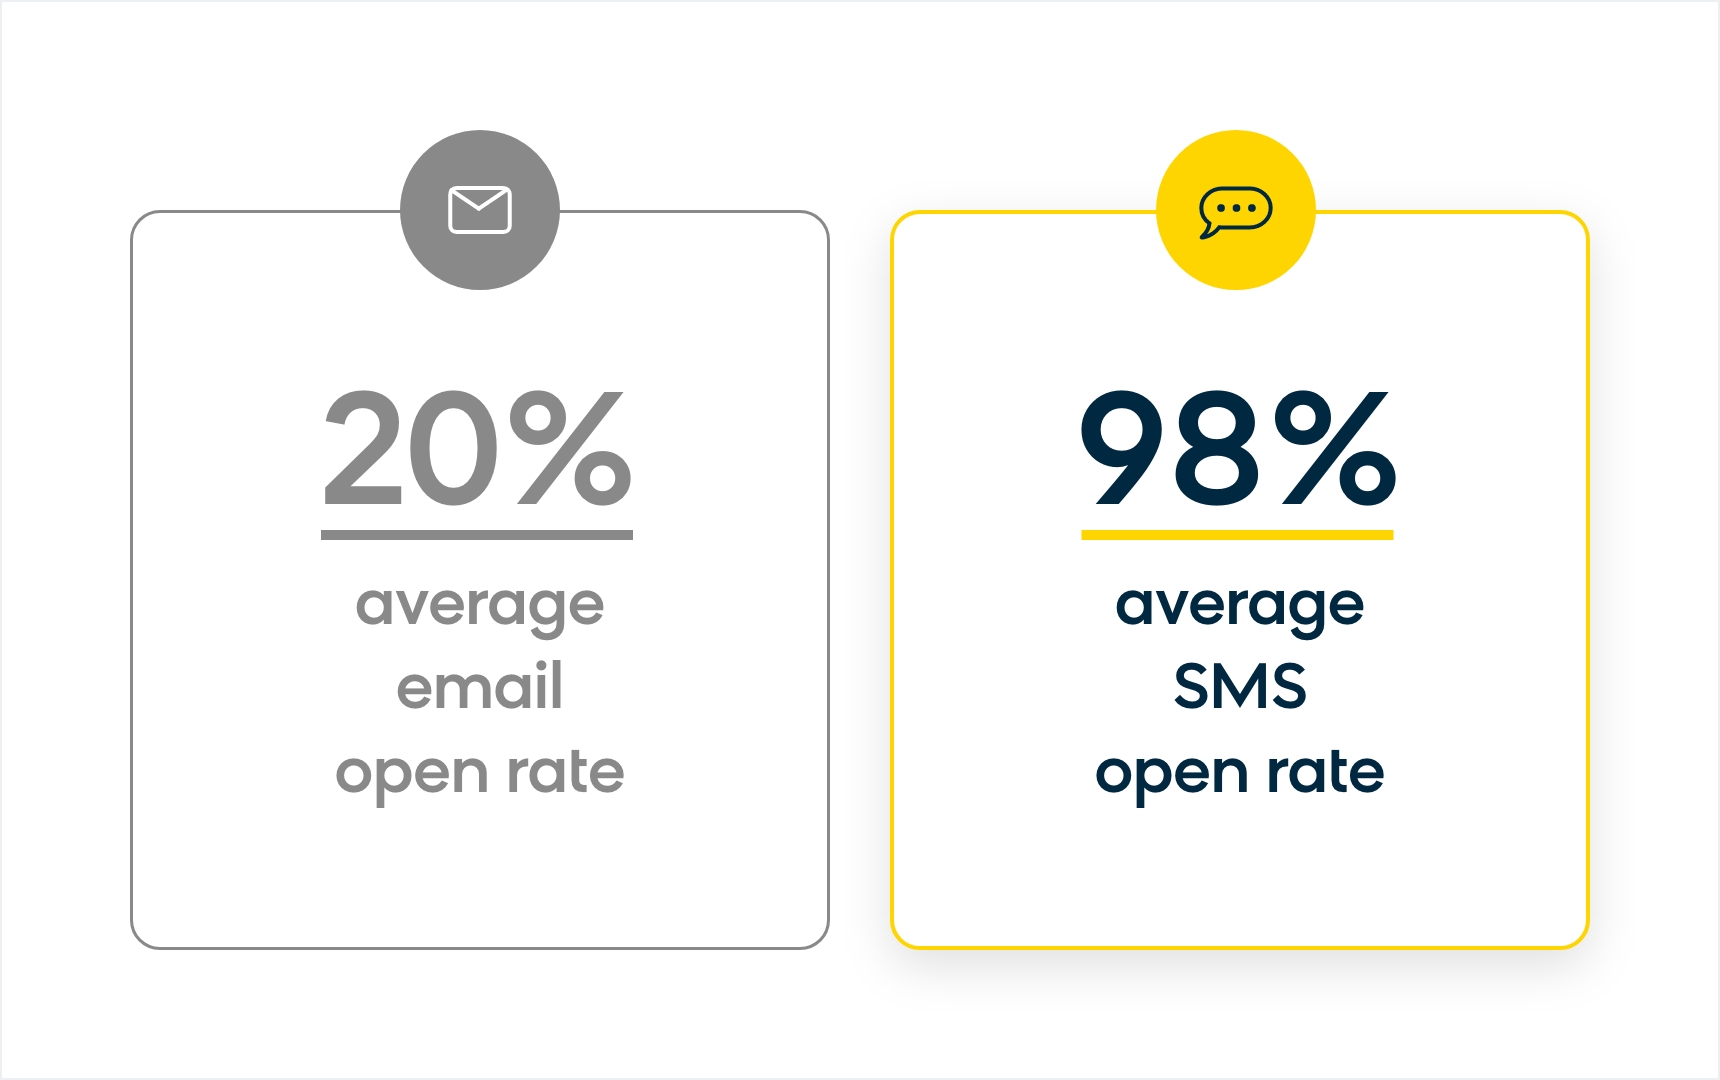 The average open rate for SMS campaigns is 98%, compared to 20% for email marketing campaigns